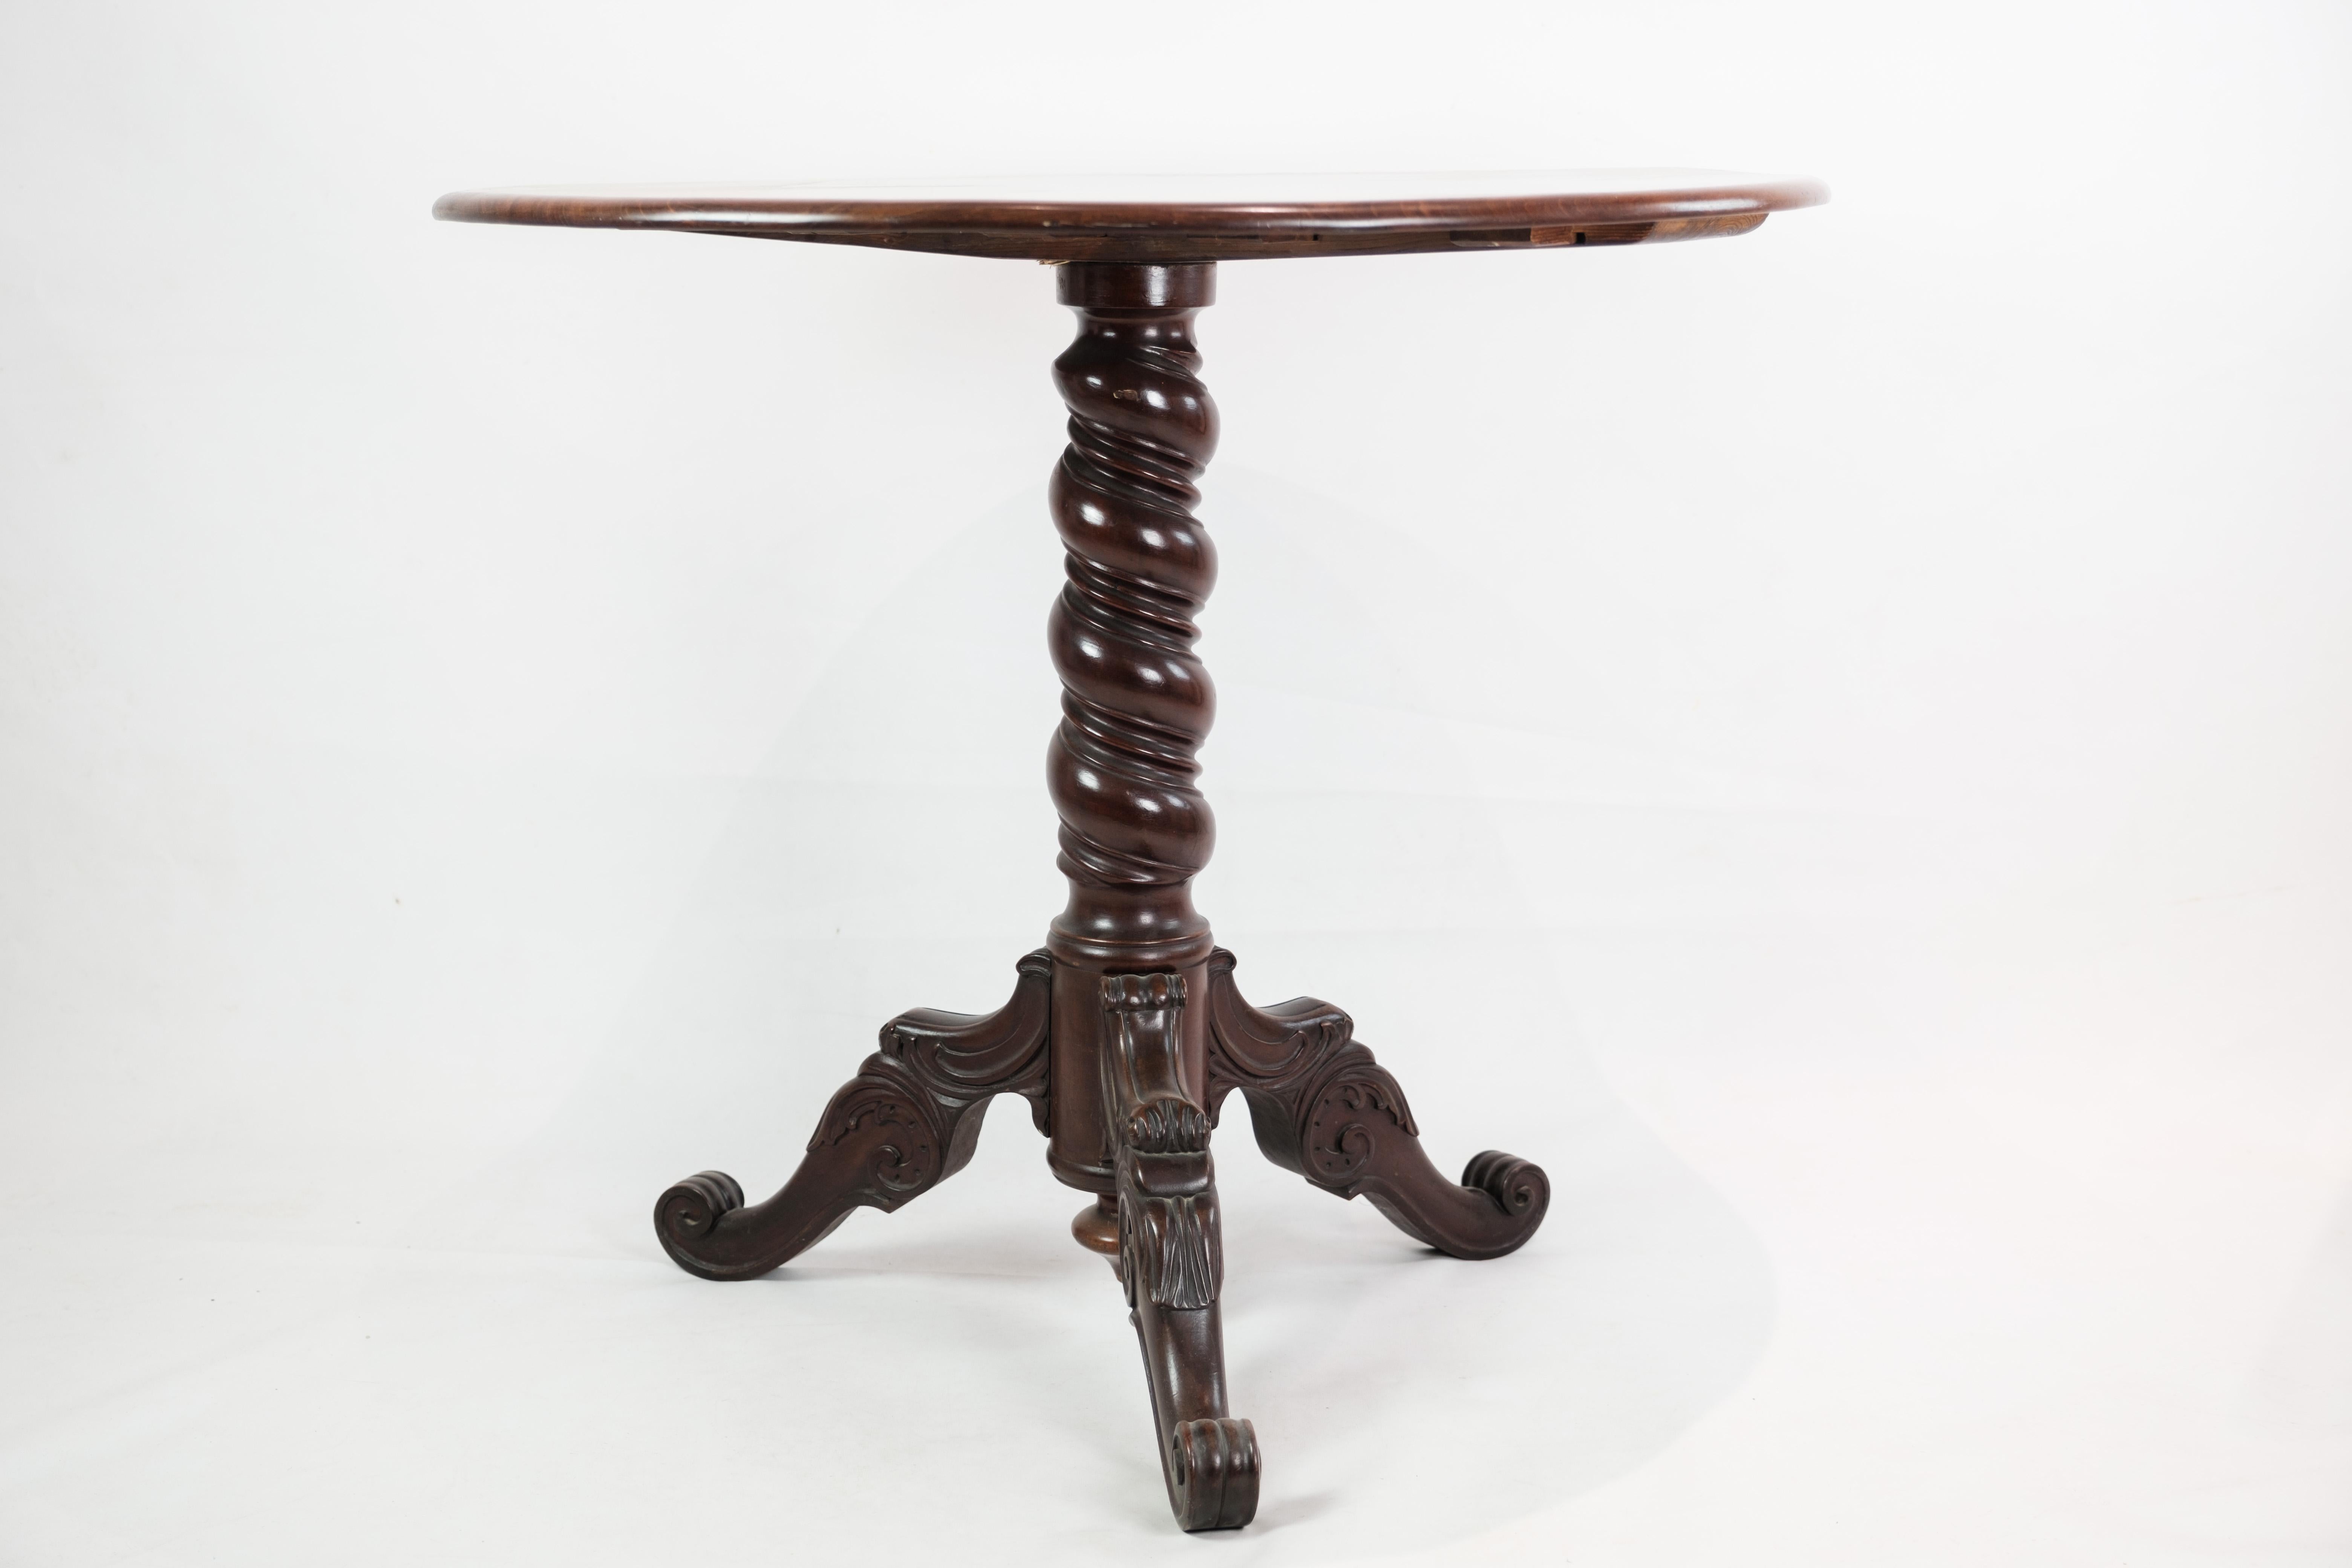 The pedestal table or side table originating from Denmark and crafted from mahogany around the 1860s is a testament to the enduring beauty of Danish craftsmanship.

This exquisite piece features the rich, warm tones characteristic of mahogany wood,